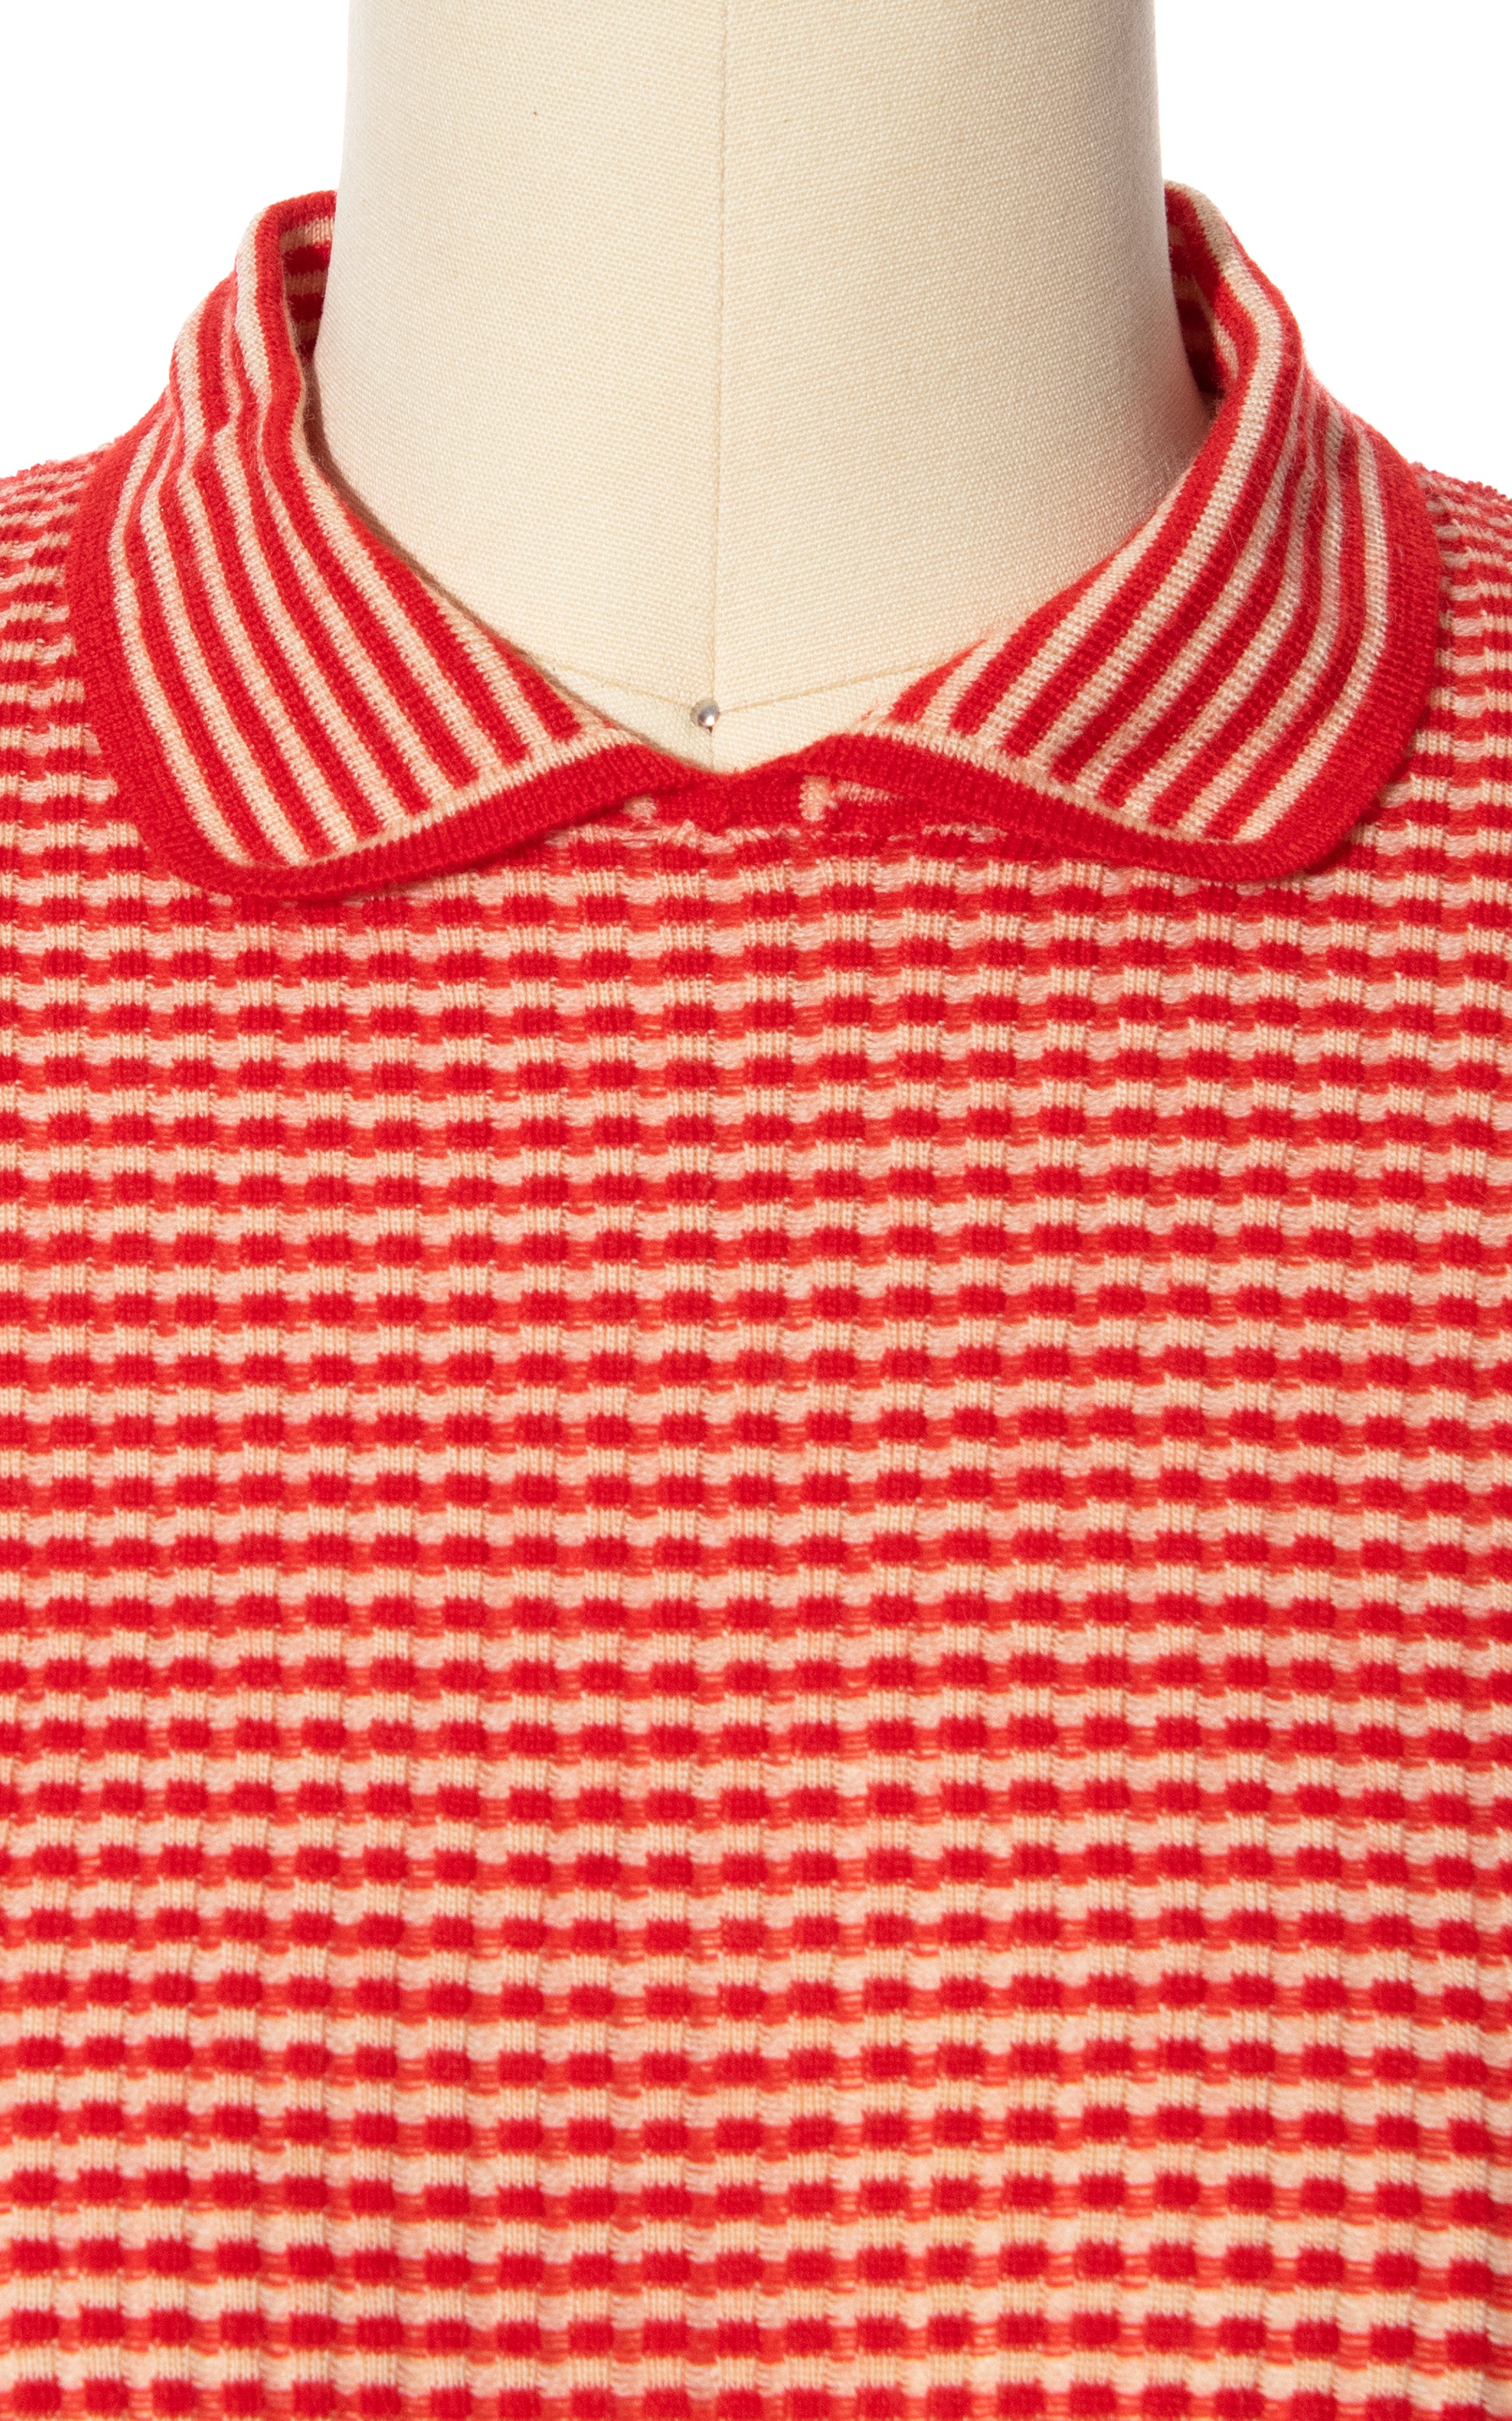 Vintage 50s 60s 1950s 1960s Red White Candycane Striped Wool Sweater Top Peter Pan Collar BirthdayLifeVintage